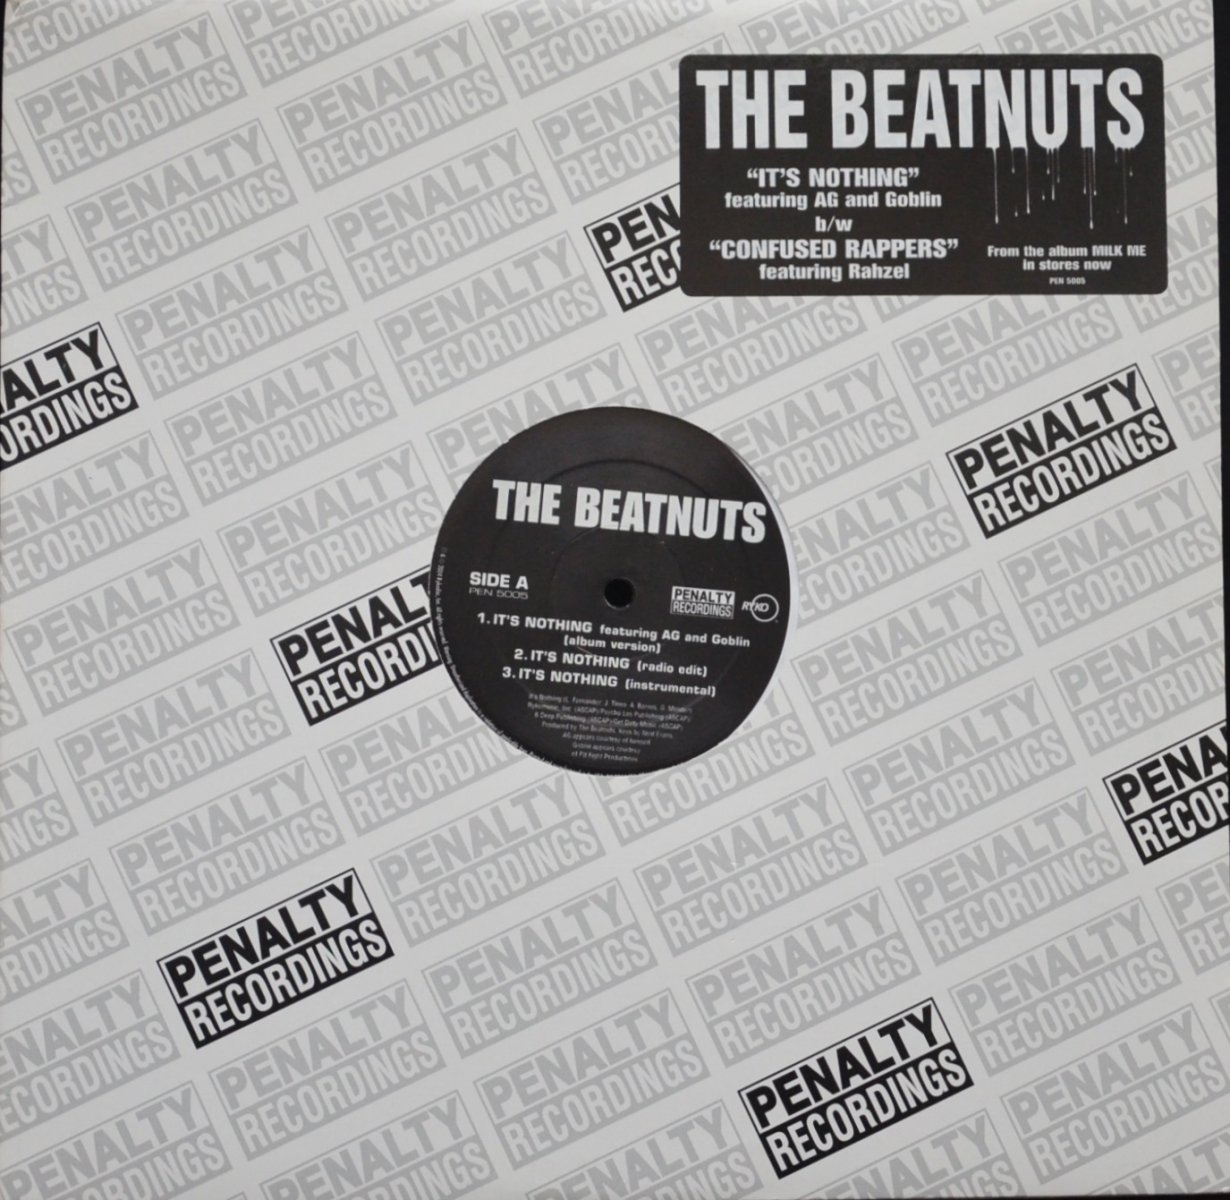 THE BEATNUTS ‎/ IT'S NOTHING (FEAT.A.G.) / CONFUSED RAPPERS (FETA.RAHZEL) (12